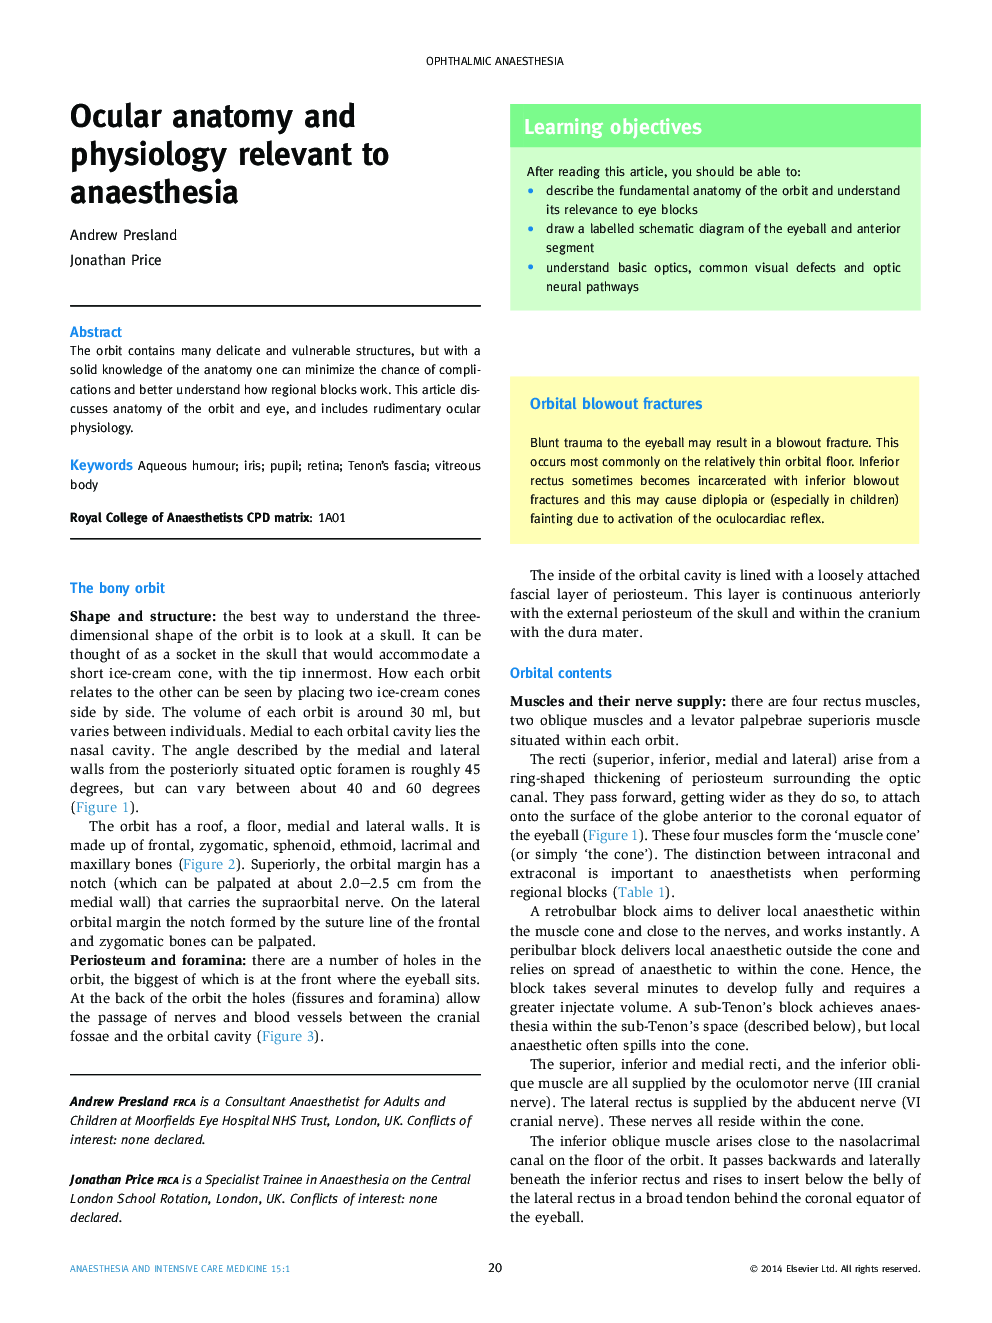 Ocular anatomy and physiology relevant to anaesthesia